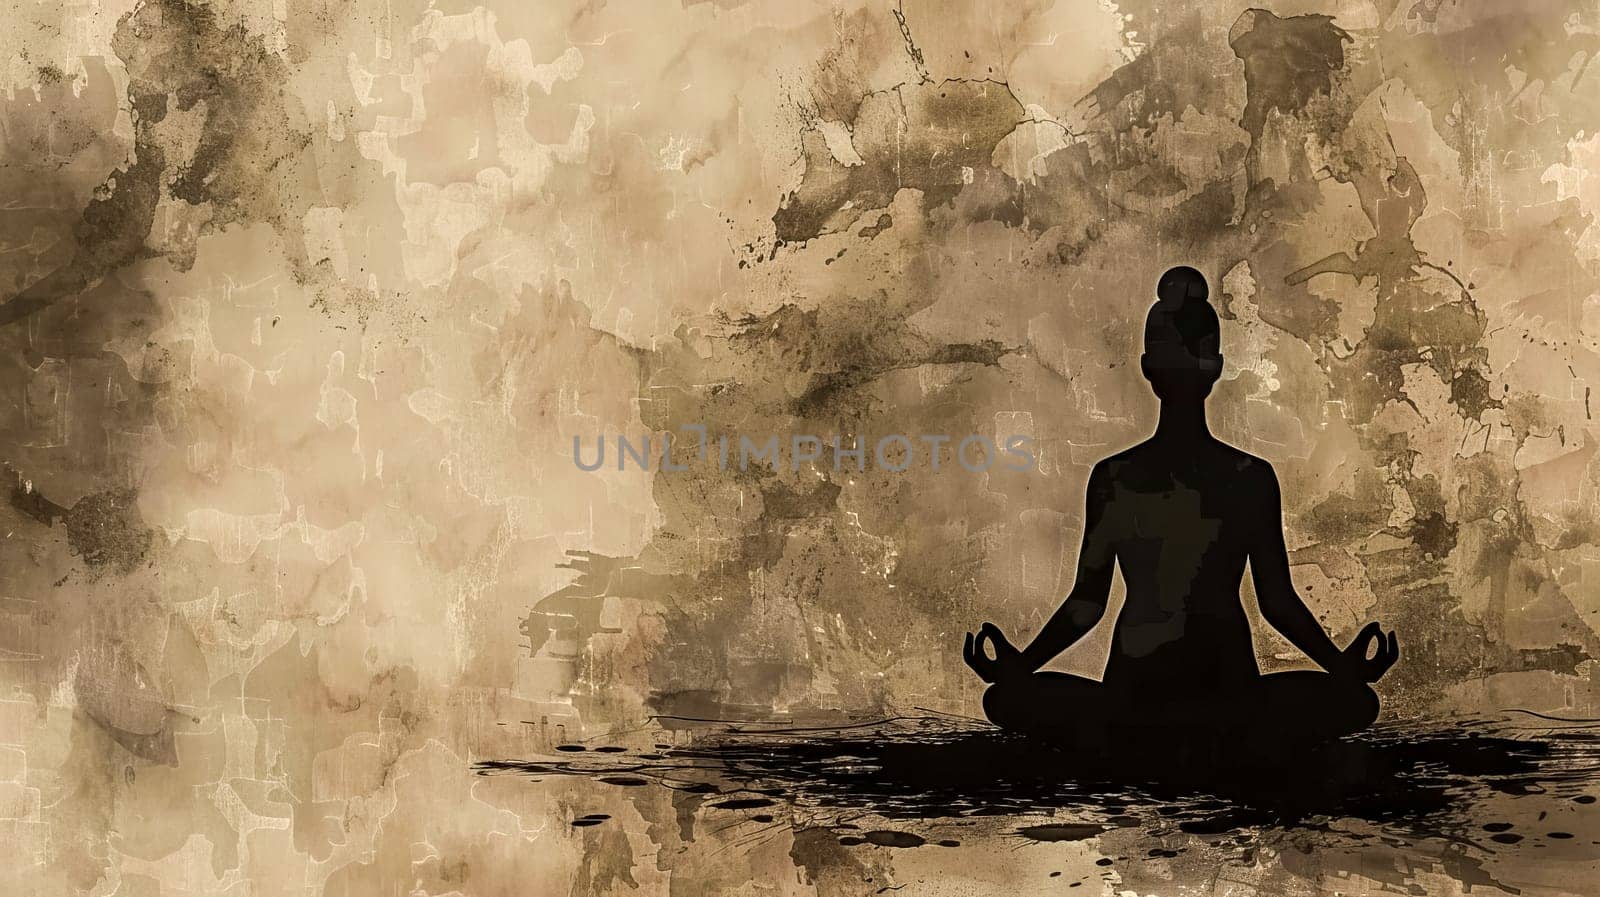 Silhouette of a person in meditation with a tranquil, textured background in earth tones by Edophoto